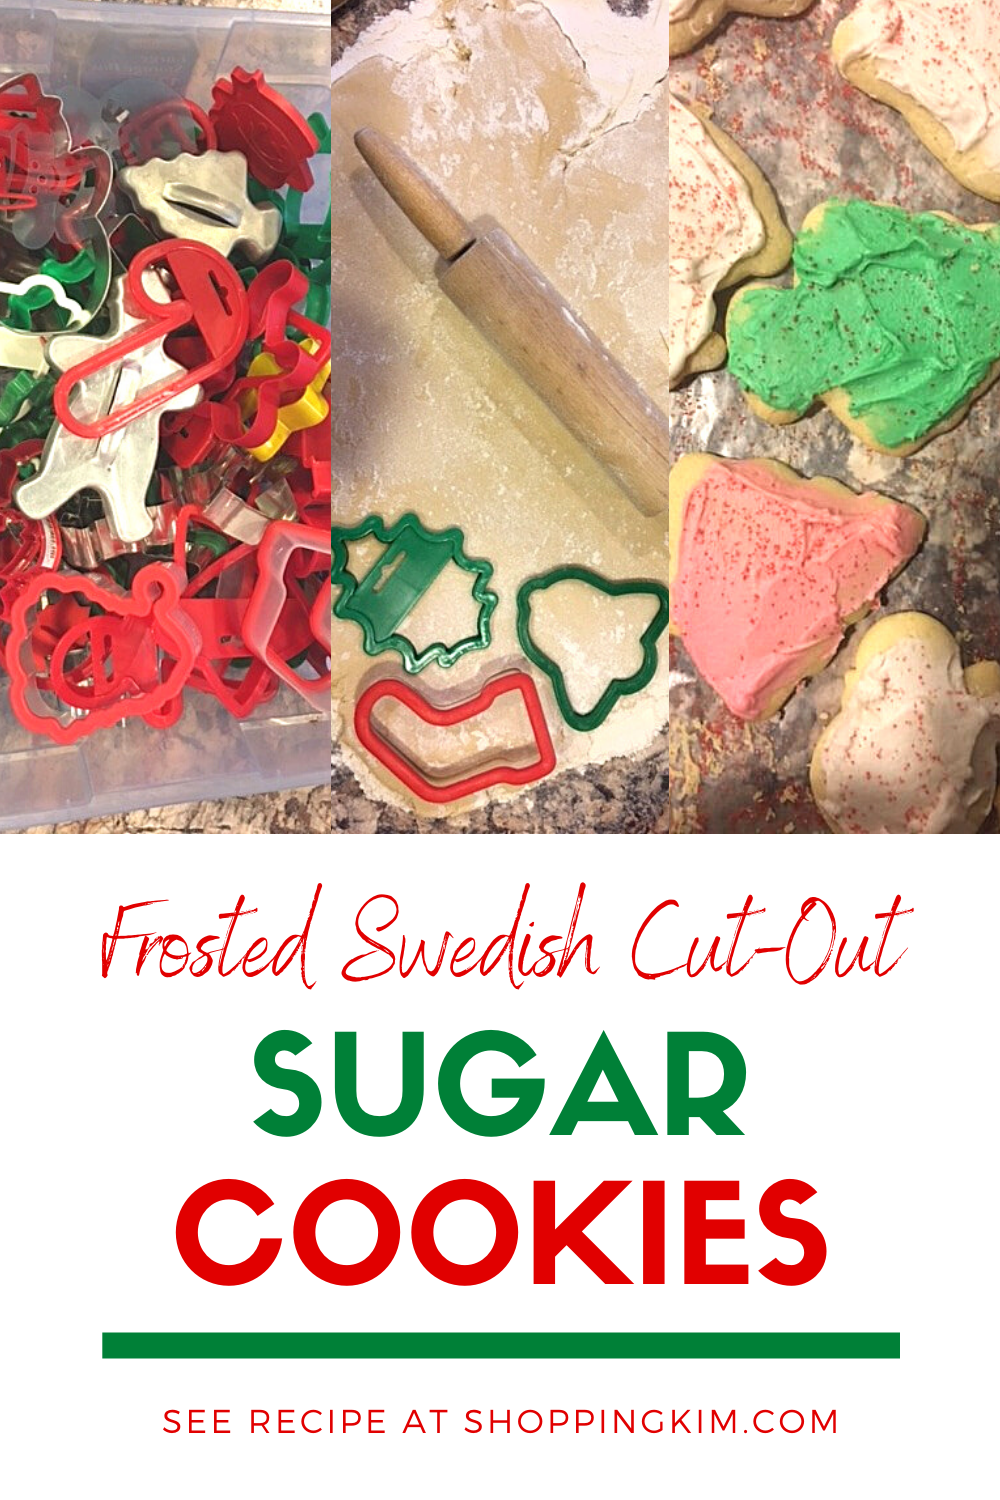 Frosted Swedish Sugar Cut-Out Cookie Recipe